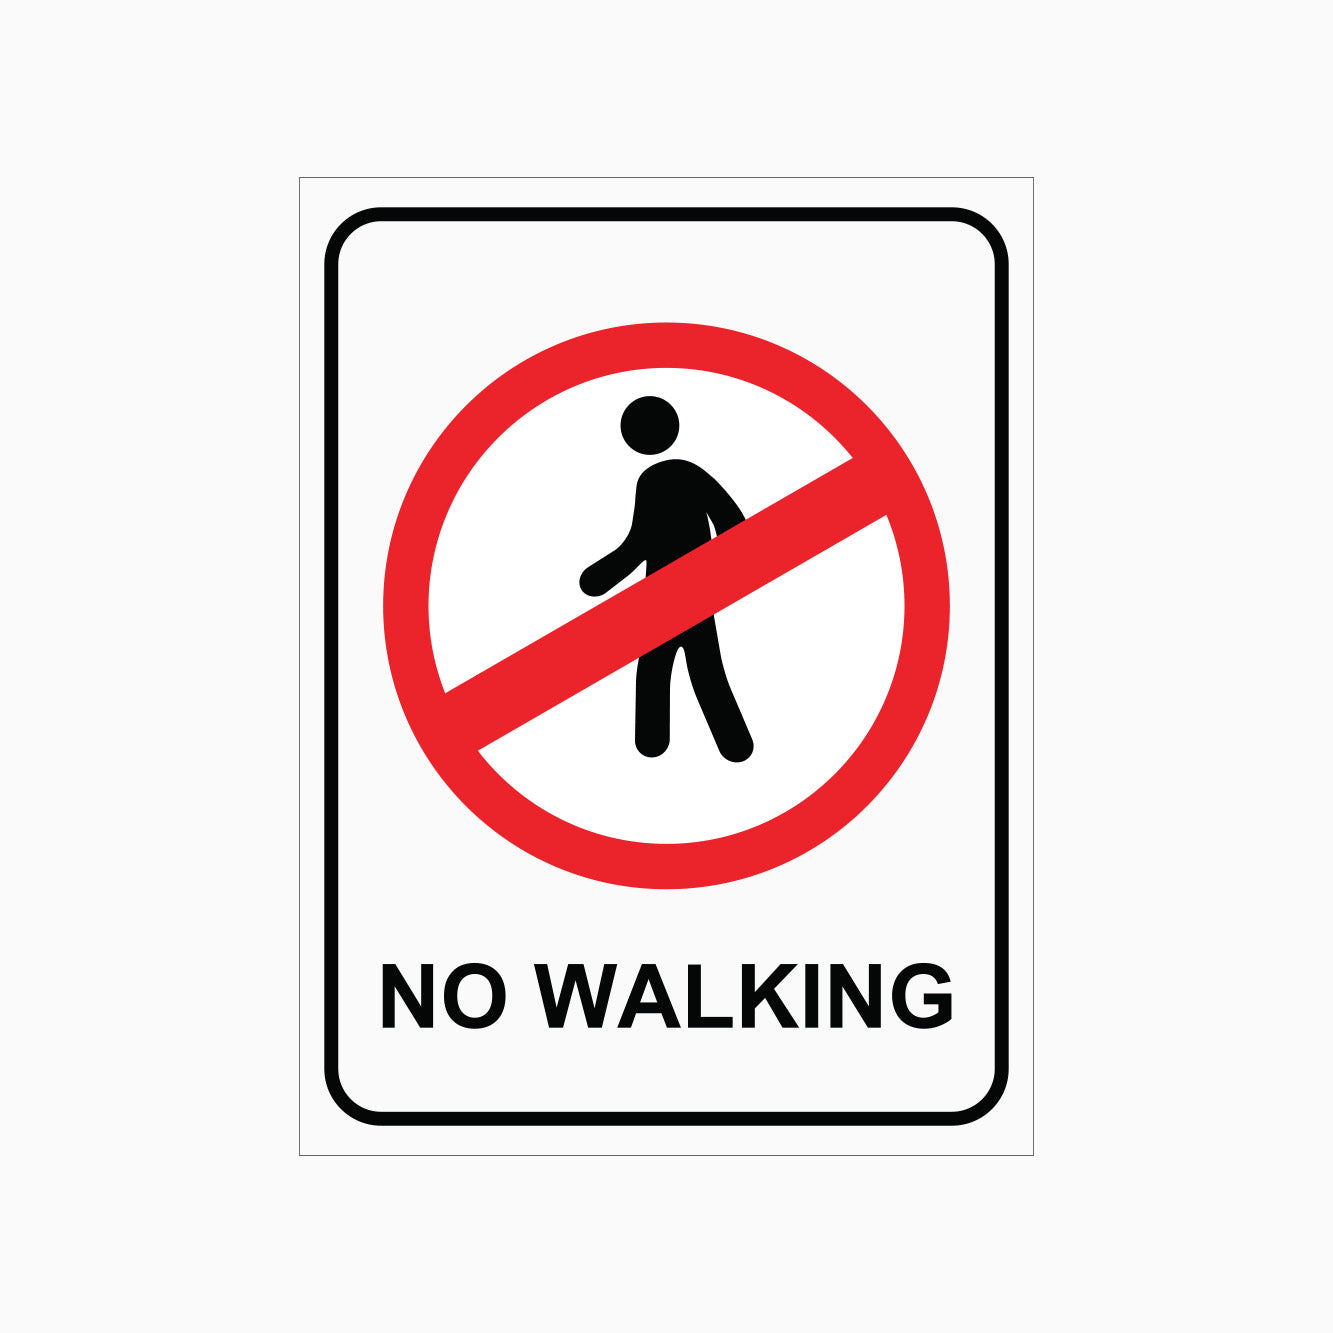 NO WALKING SIGN - PROHIBITION SIGNS IN AUSTRALIA